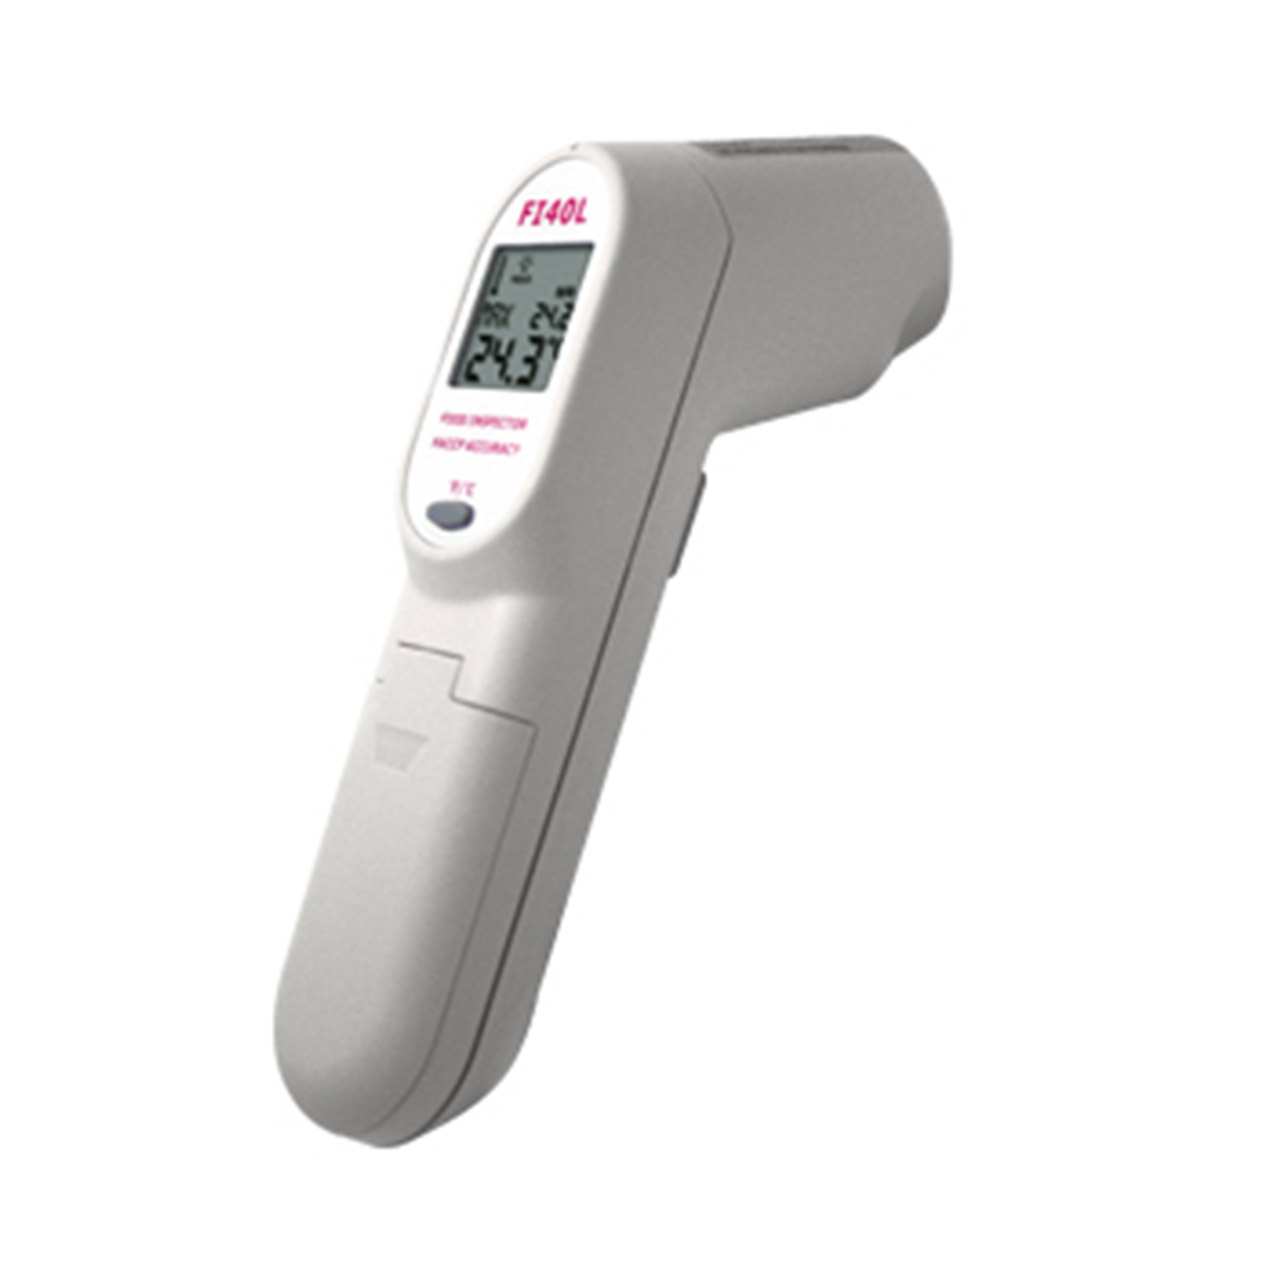 http://www.freezerwear.com/Shared/Images/Product/33033-Infrared-Dual-Laser-Thermometer/Samco_33033_lg.jpg